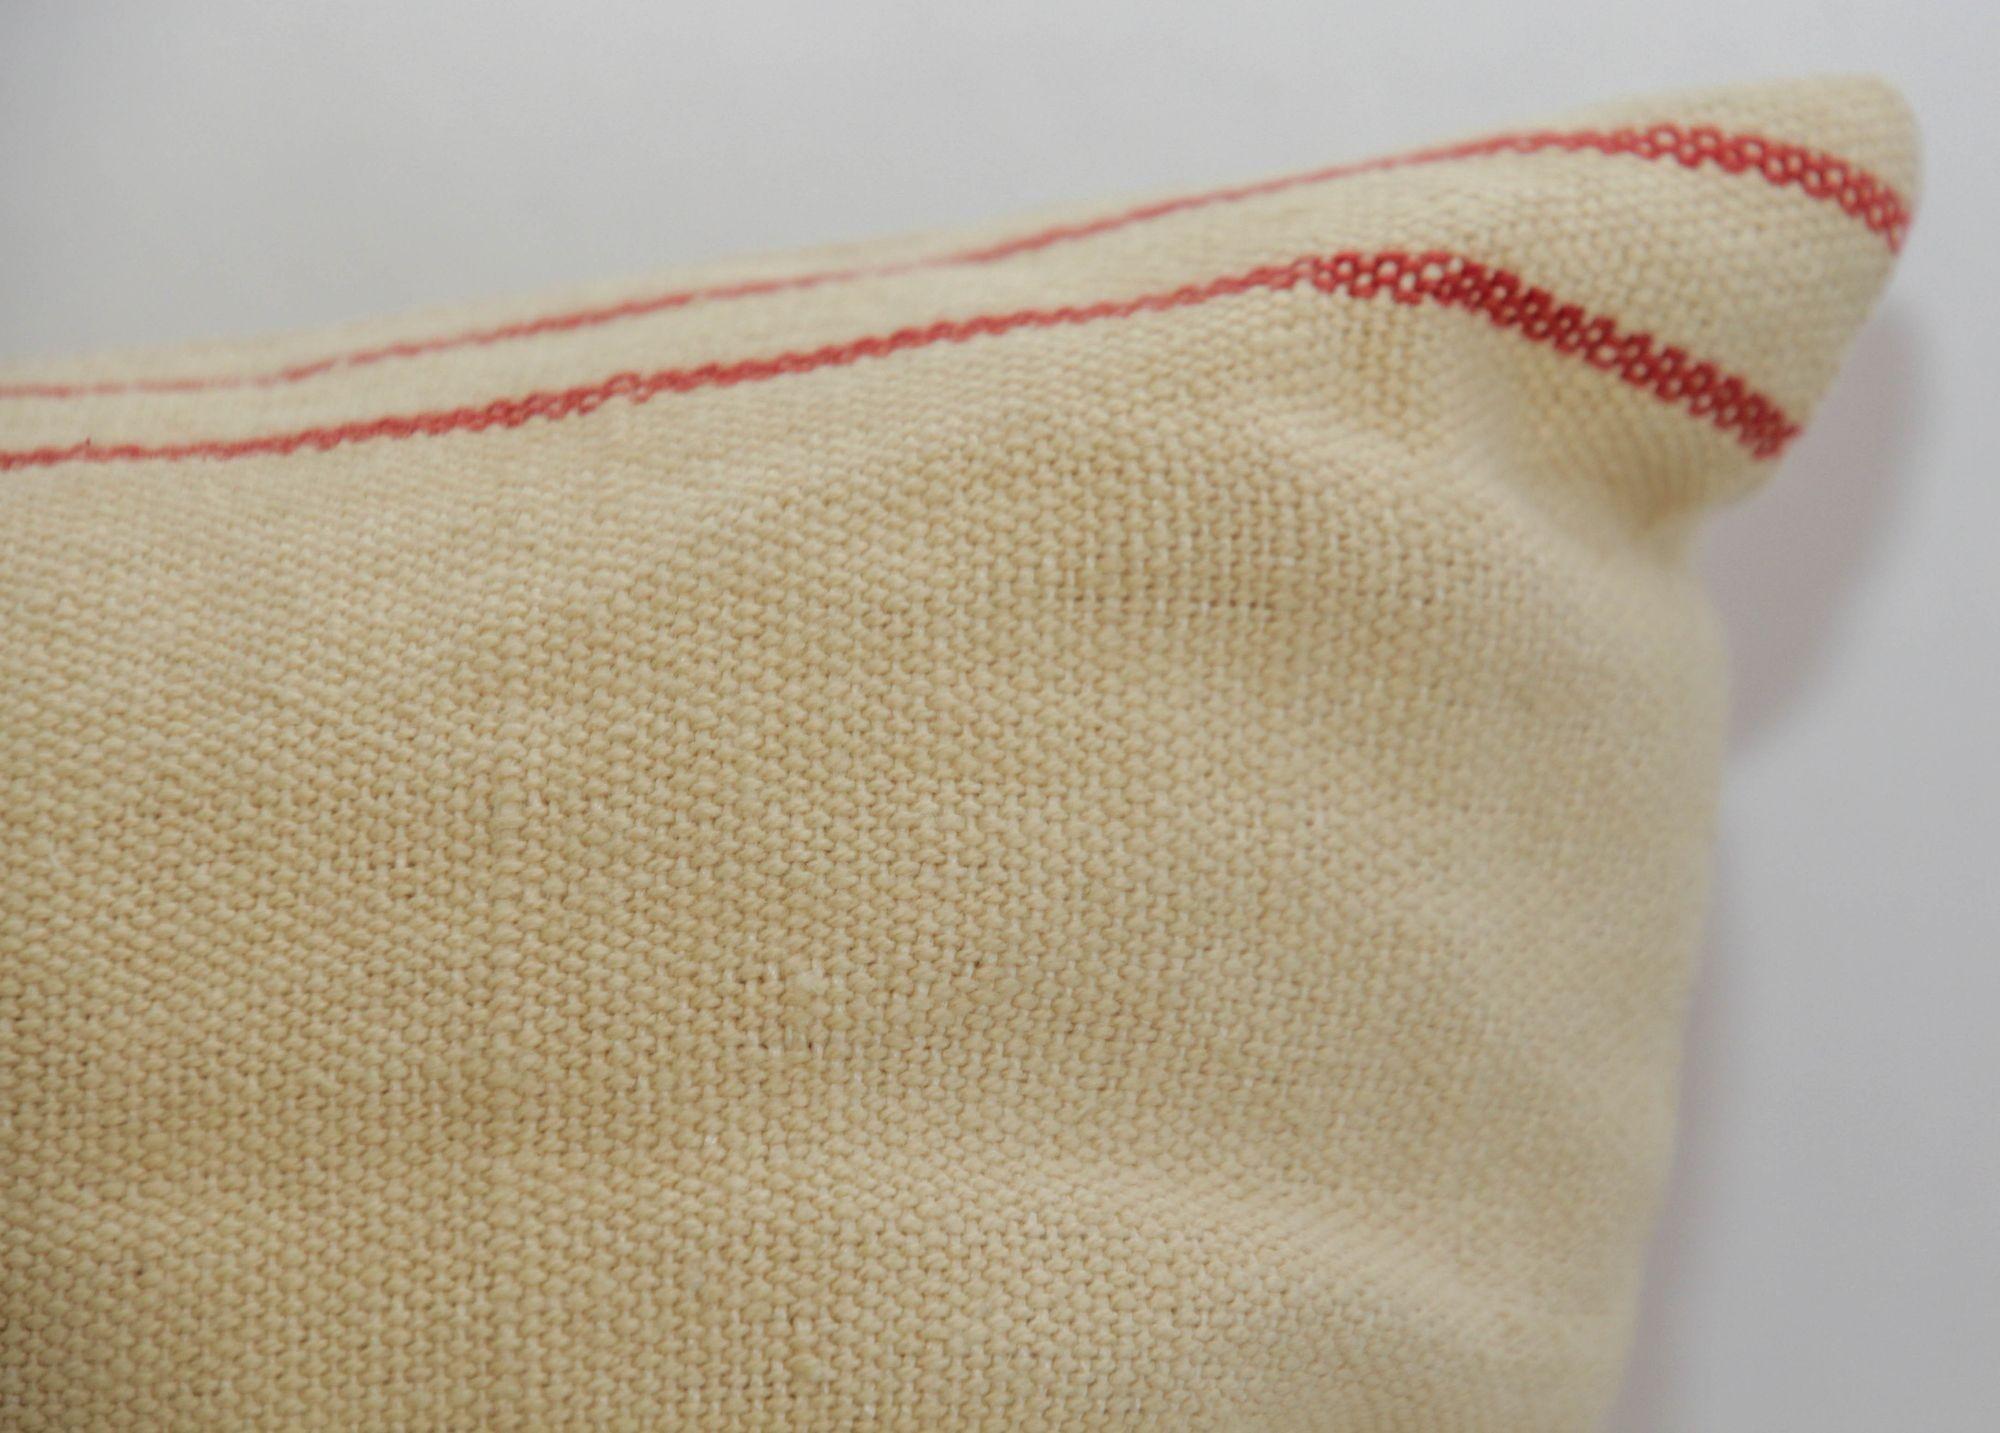 Vintage rectangular shape Country French grain sack red stripes linen color background throw pillow.
Lauren Ralph Lauren, RLL decorative linen lumbar throw pillow with stripe and side ties and down filled insert.
Rectangular shape Ralph Lauren